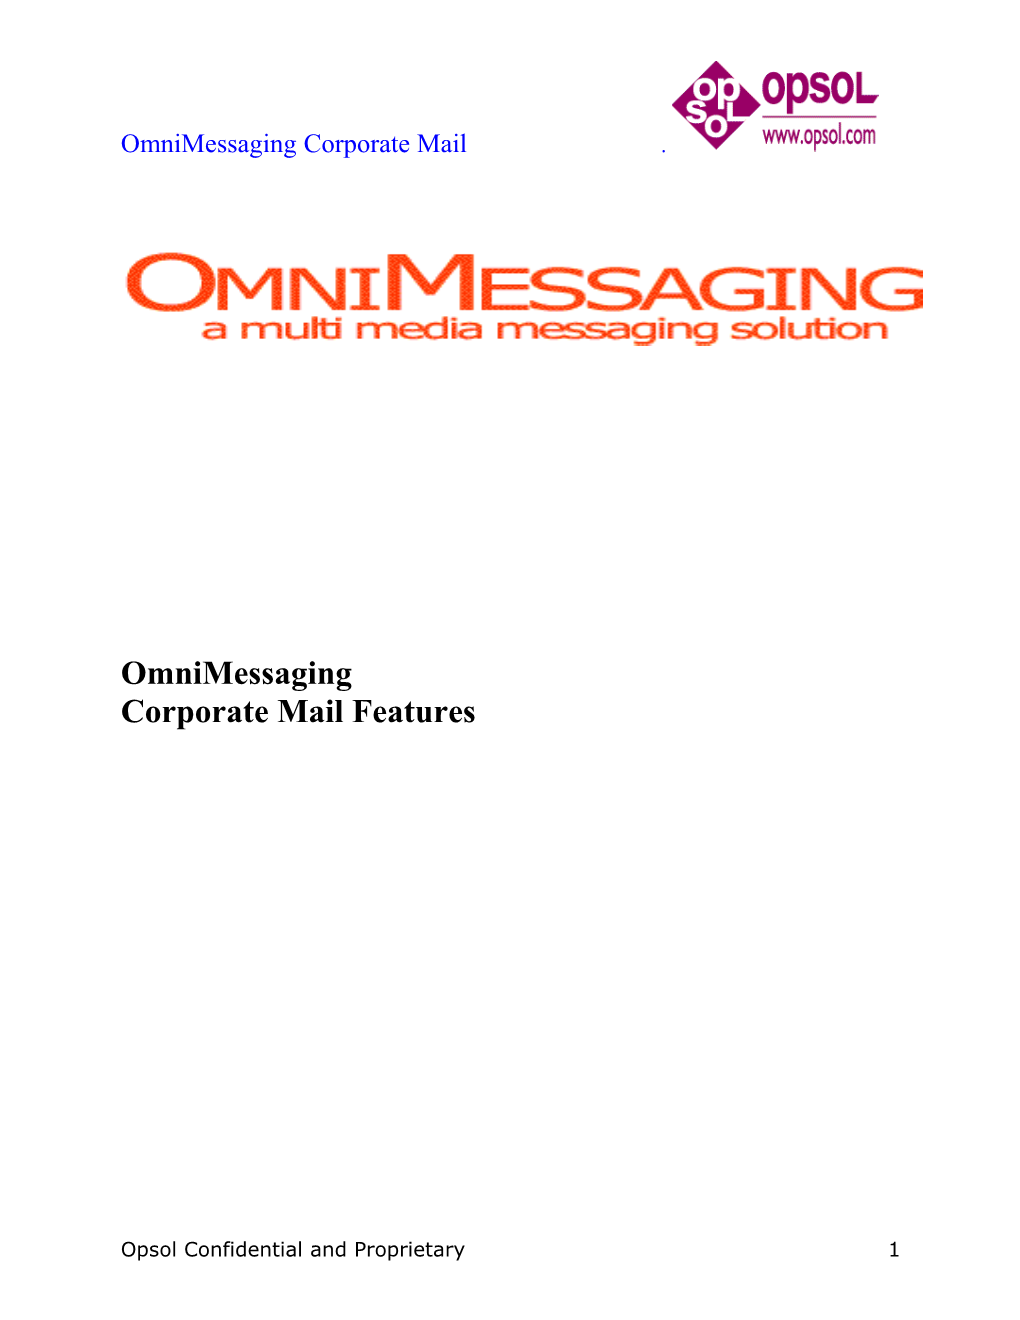 Omnimessaging Corporate Mail Features